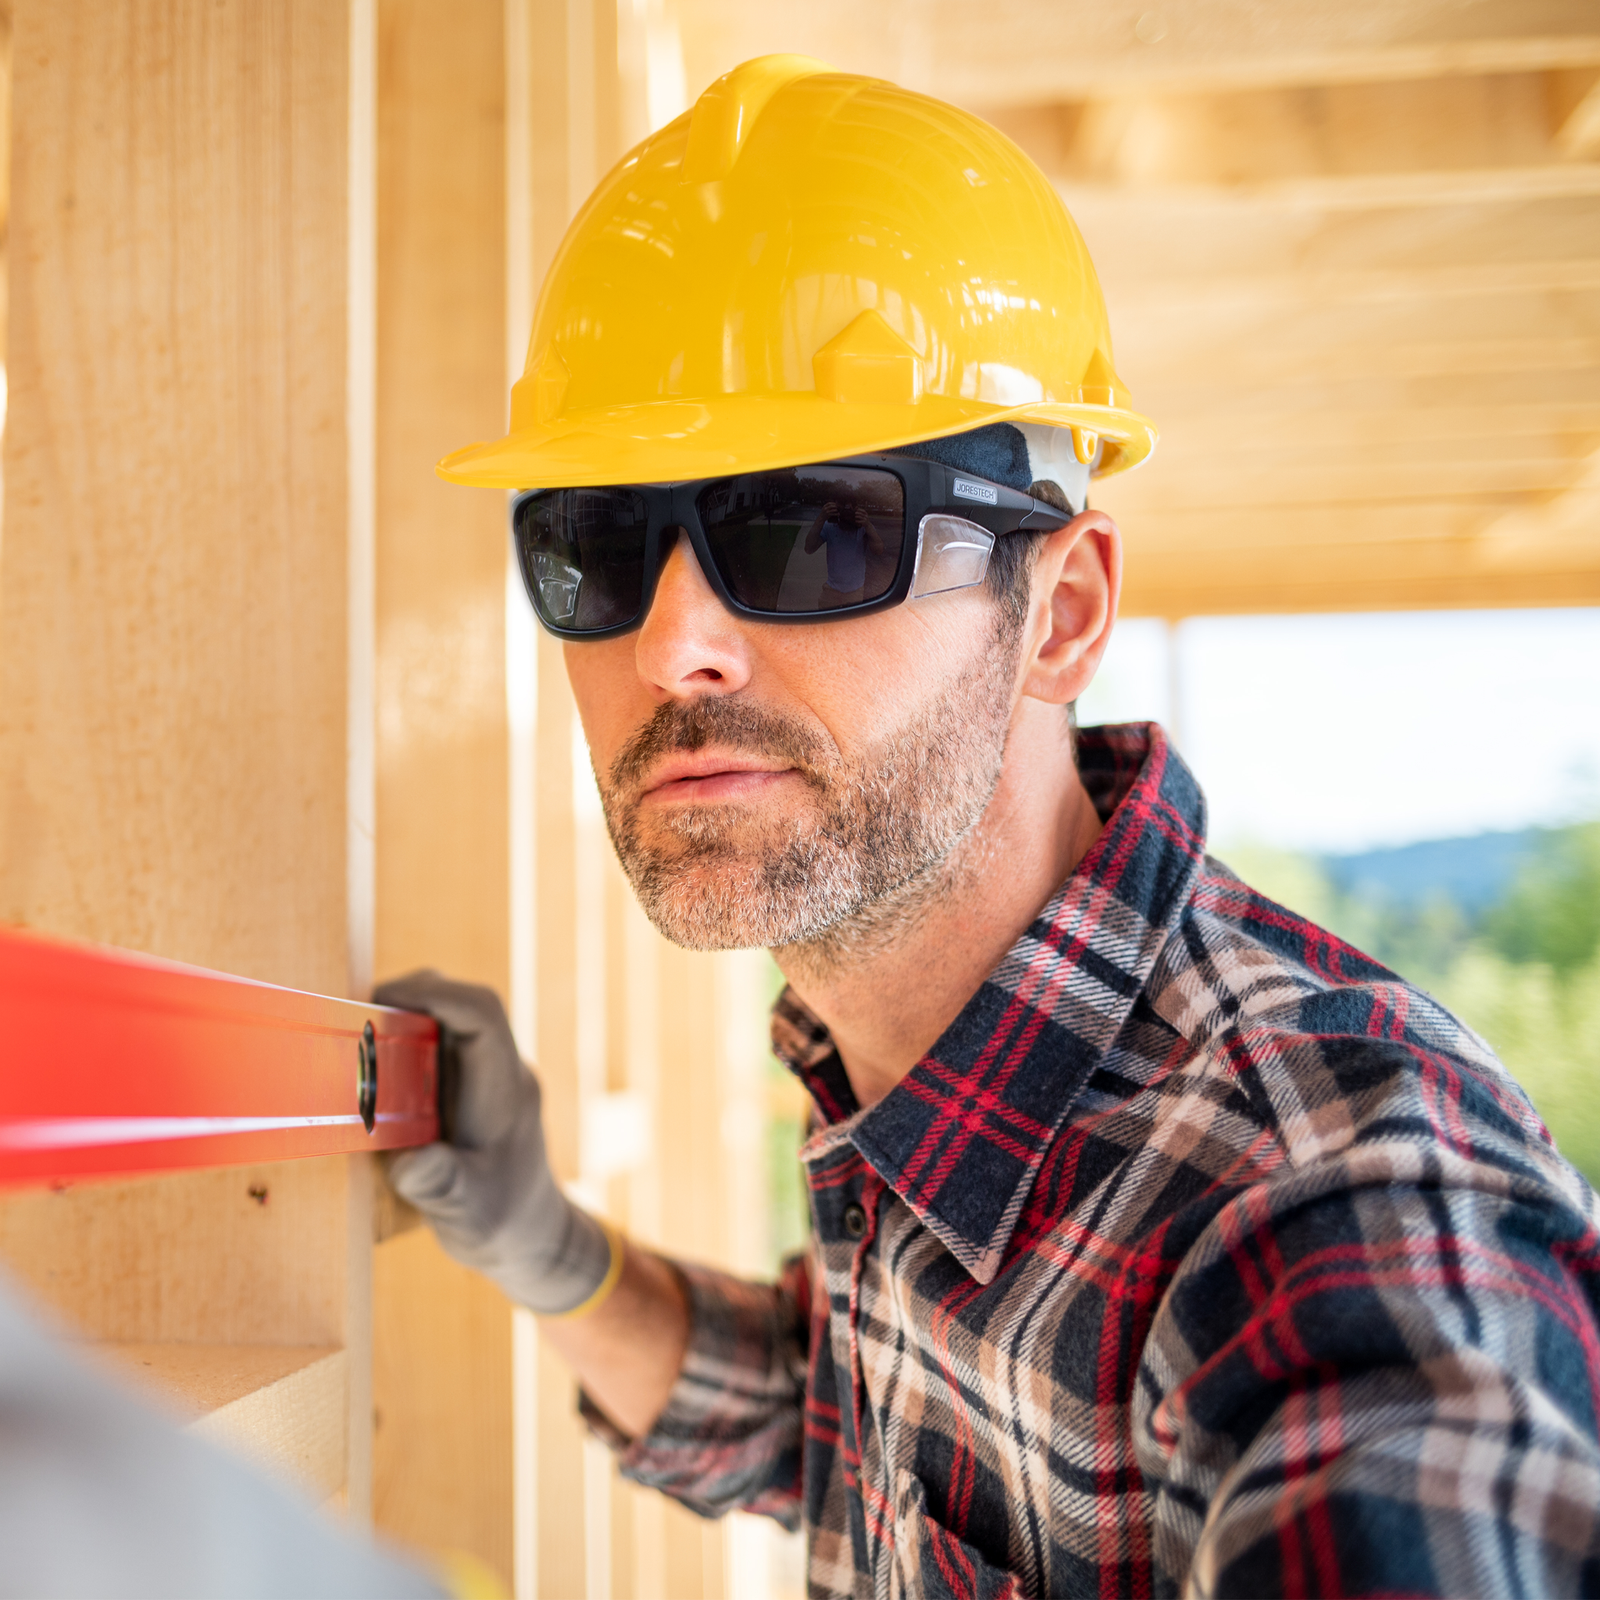 Image of a man wearing a yellow and the JORESTECH high impact sun safety glasses with side shields.. The man is checking the level of the wood structure of a house. The construction does not have walls or roof yet.